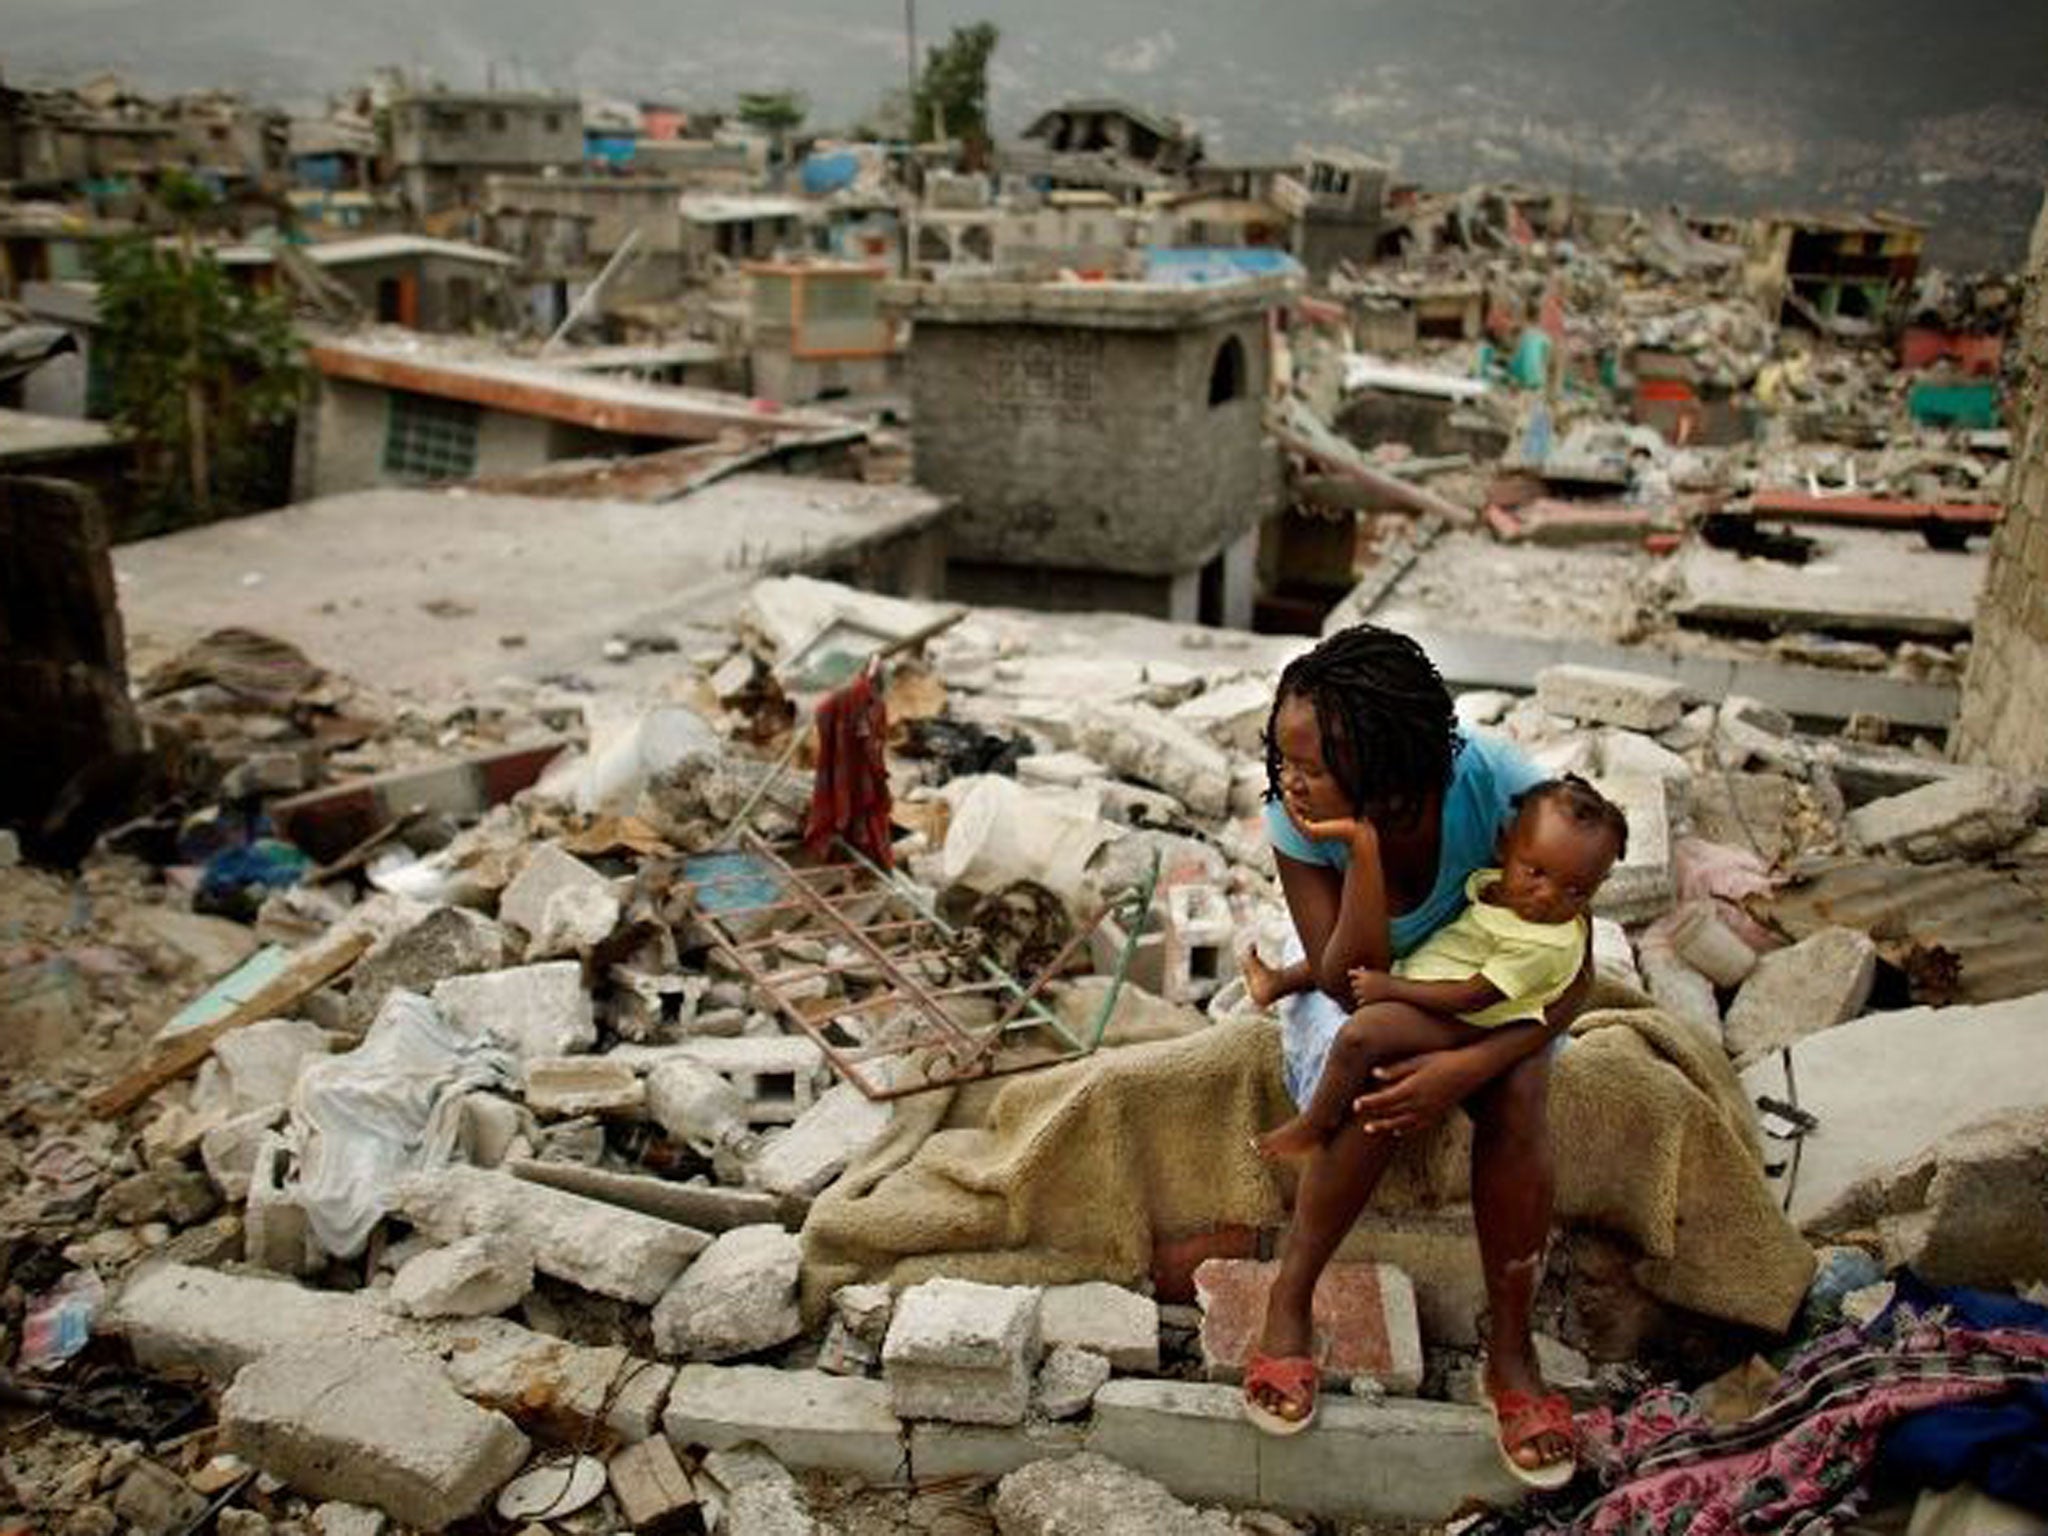 Sherider Anilus, 28, and her daughter, 9-month-old Monica, sit on the spot where her home collapsed during the earthquake in Port-au-Prince in Febuary 2010